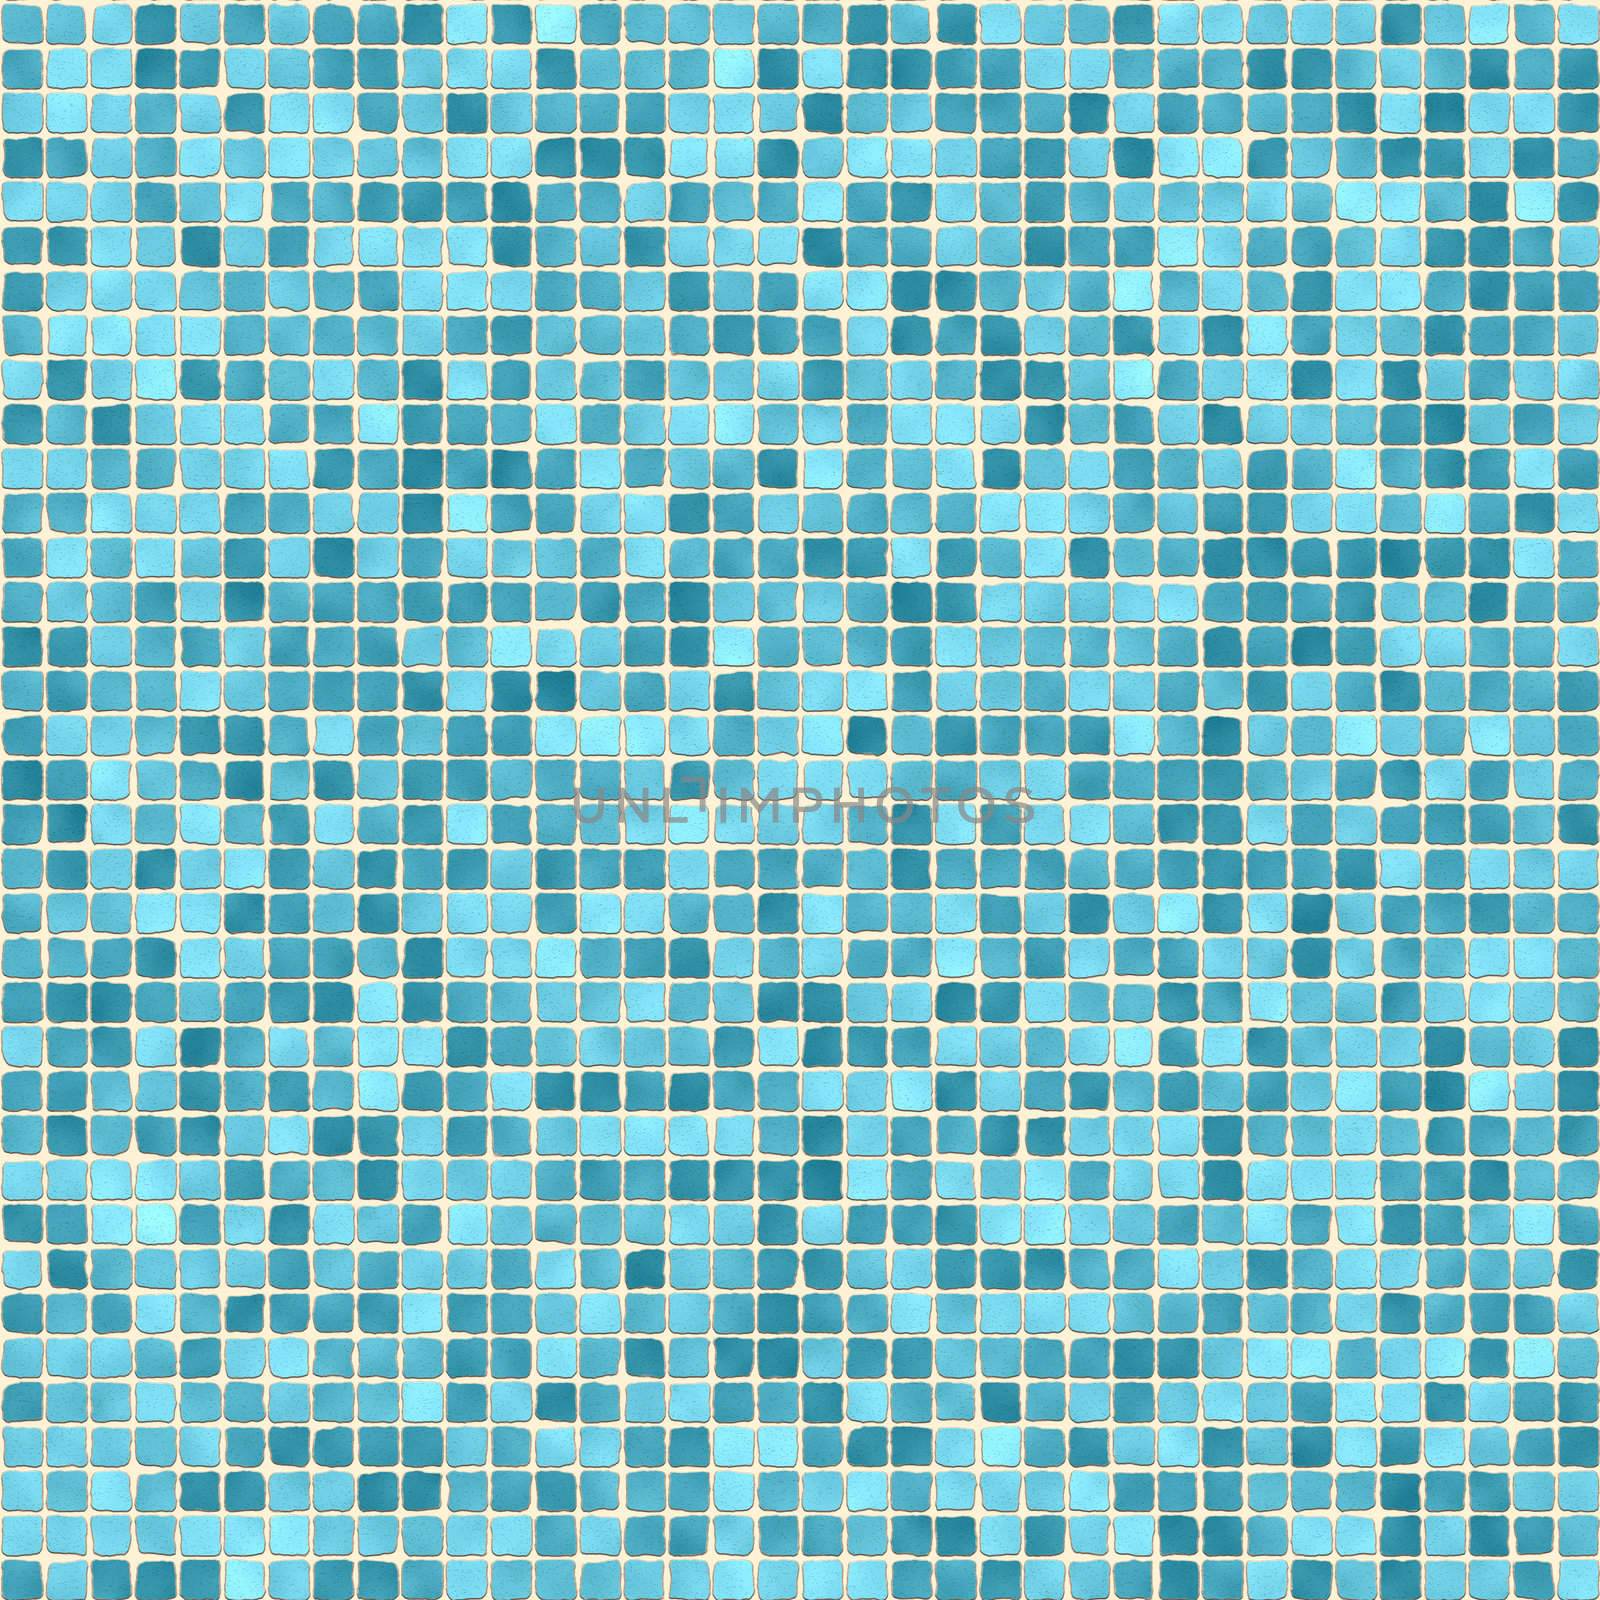 Small green tiles texture common in swimming pools